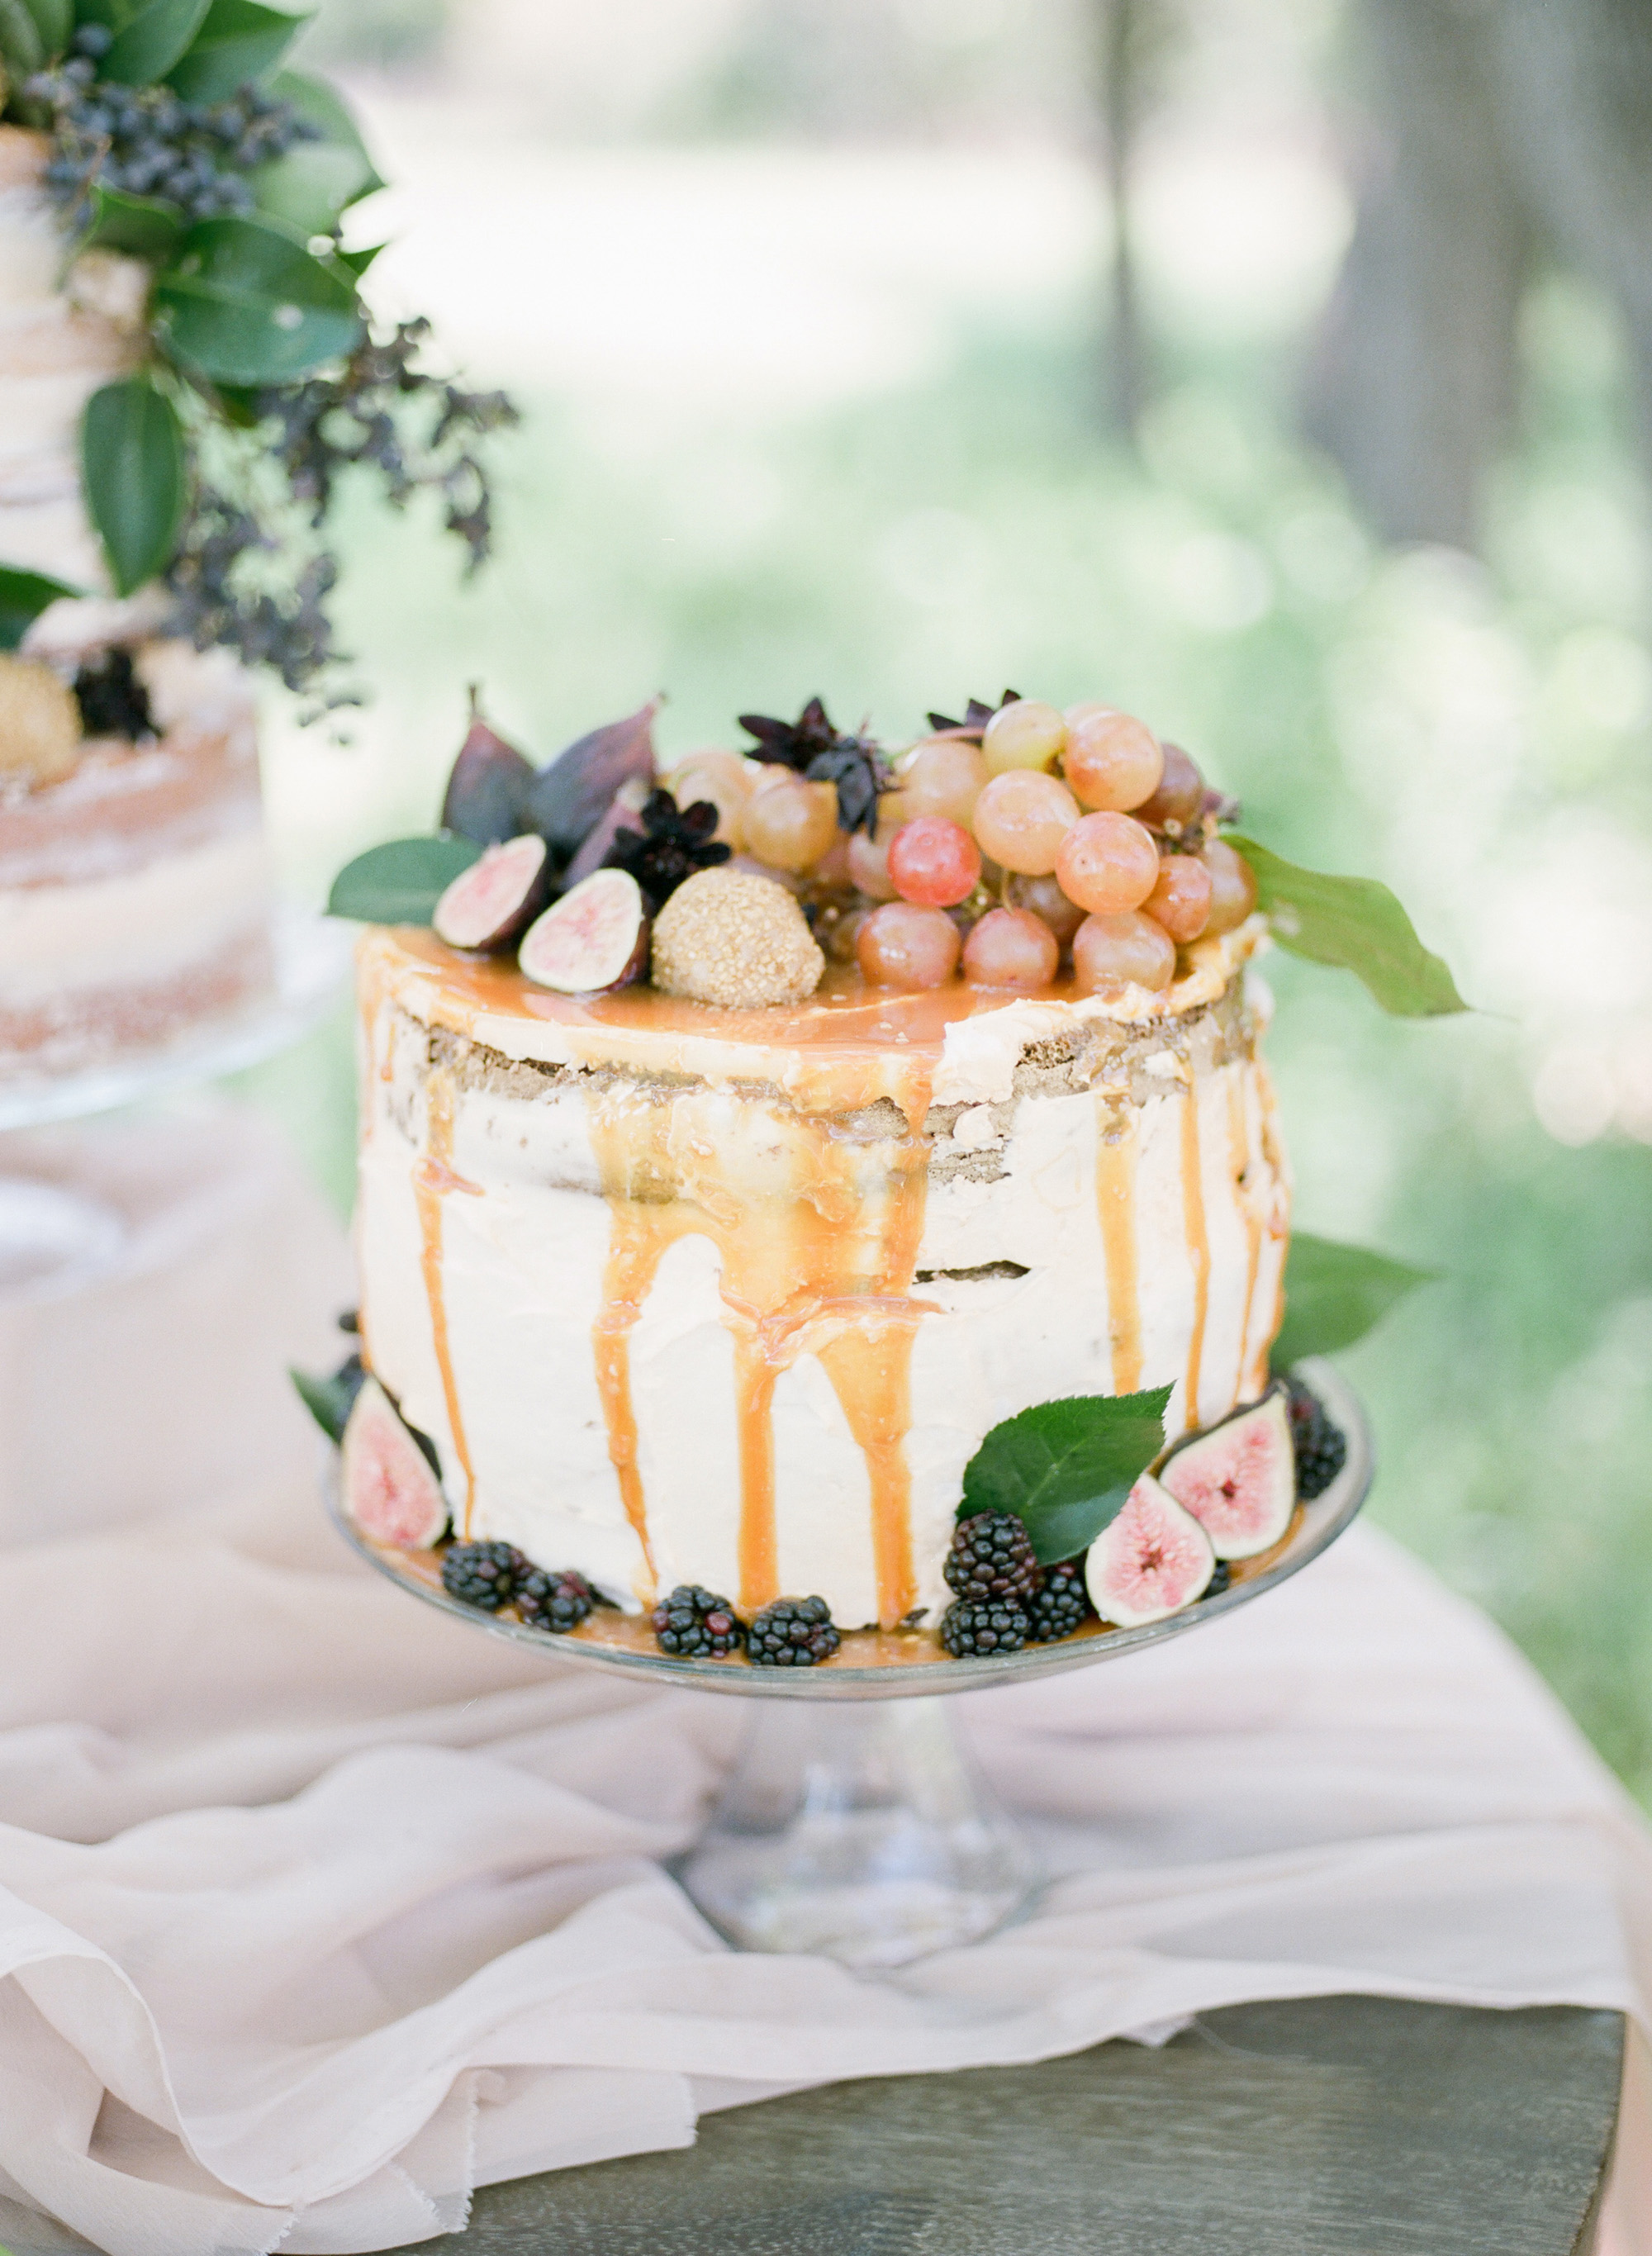 Fig wedding cake at an Austin wedding photographed by Dallas fine art photographer Tenth & Grace.